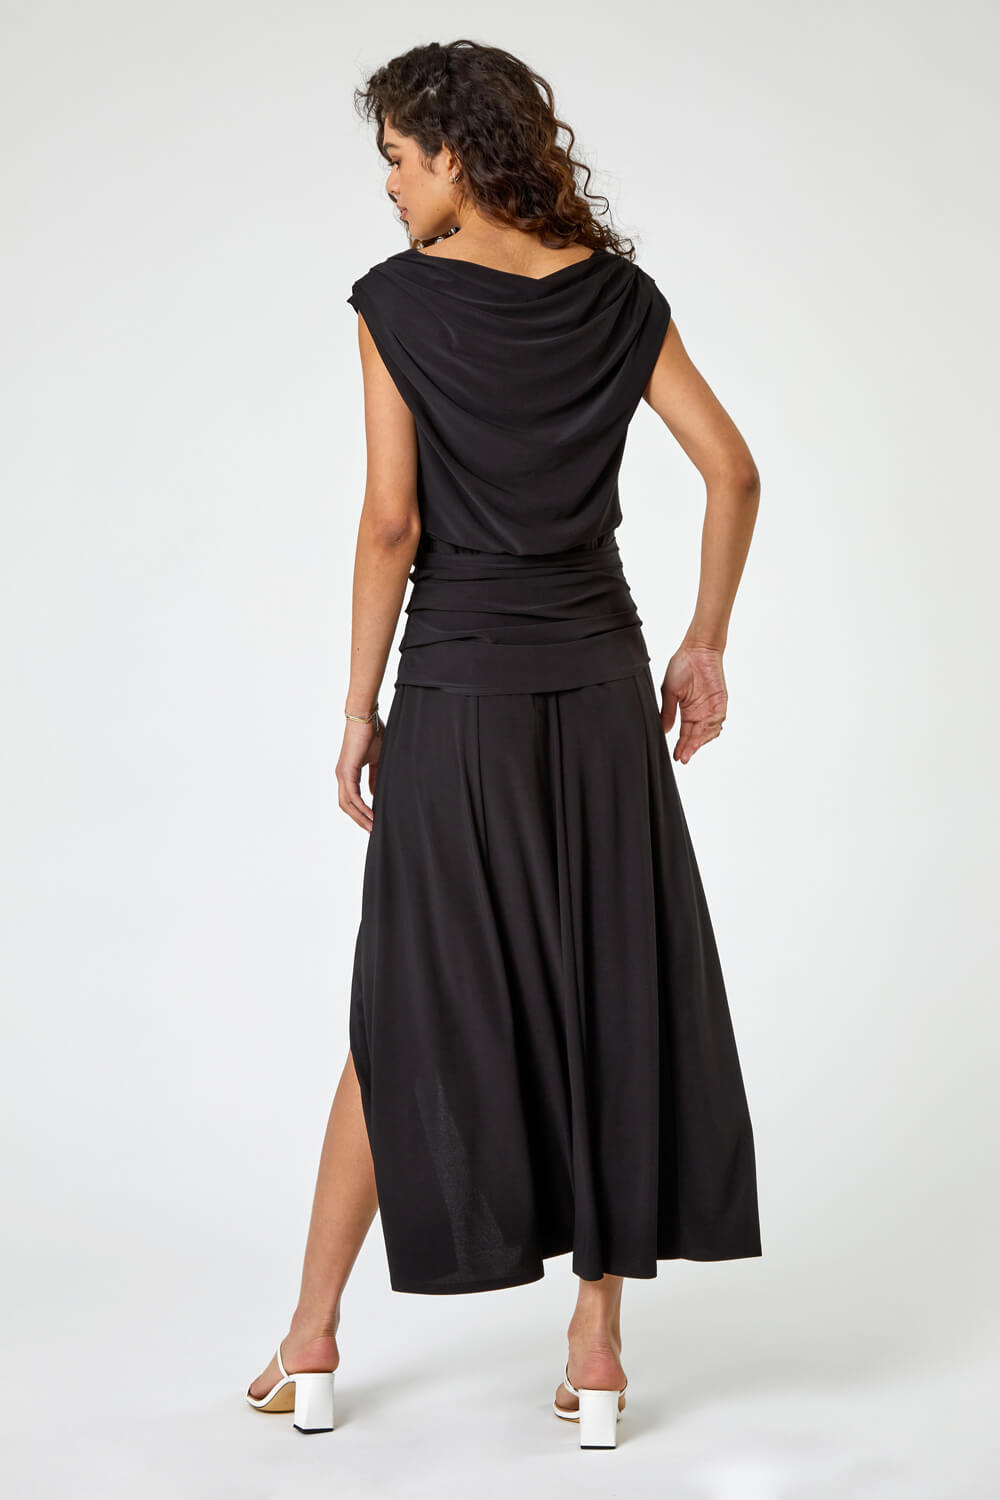 Black Cowl Neck Ruched Maxi Dress, Image 2 of 4